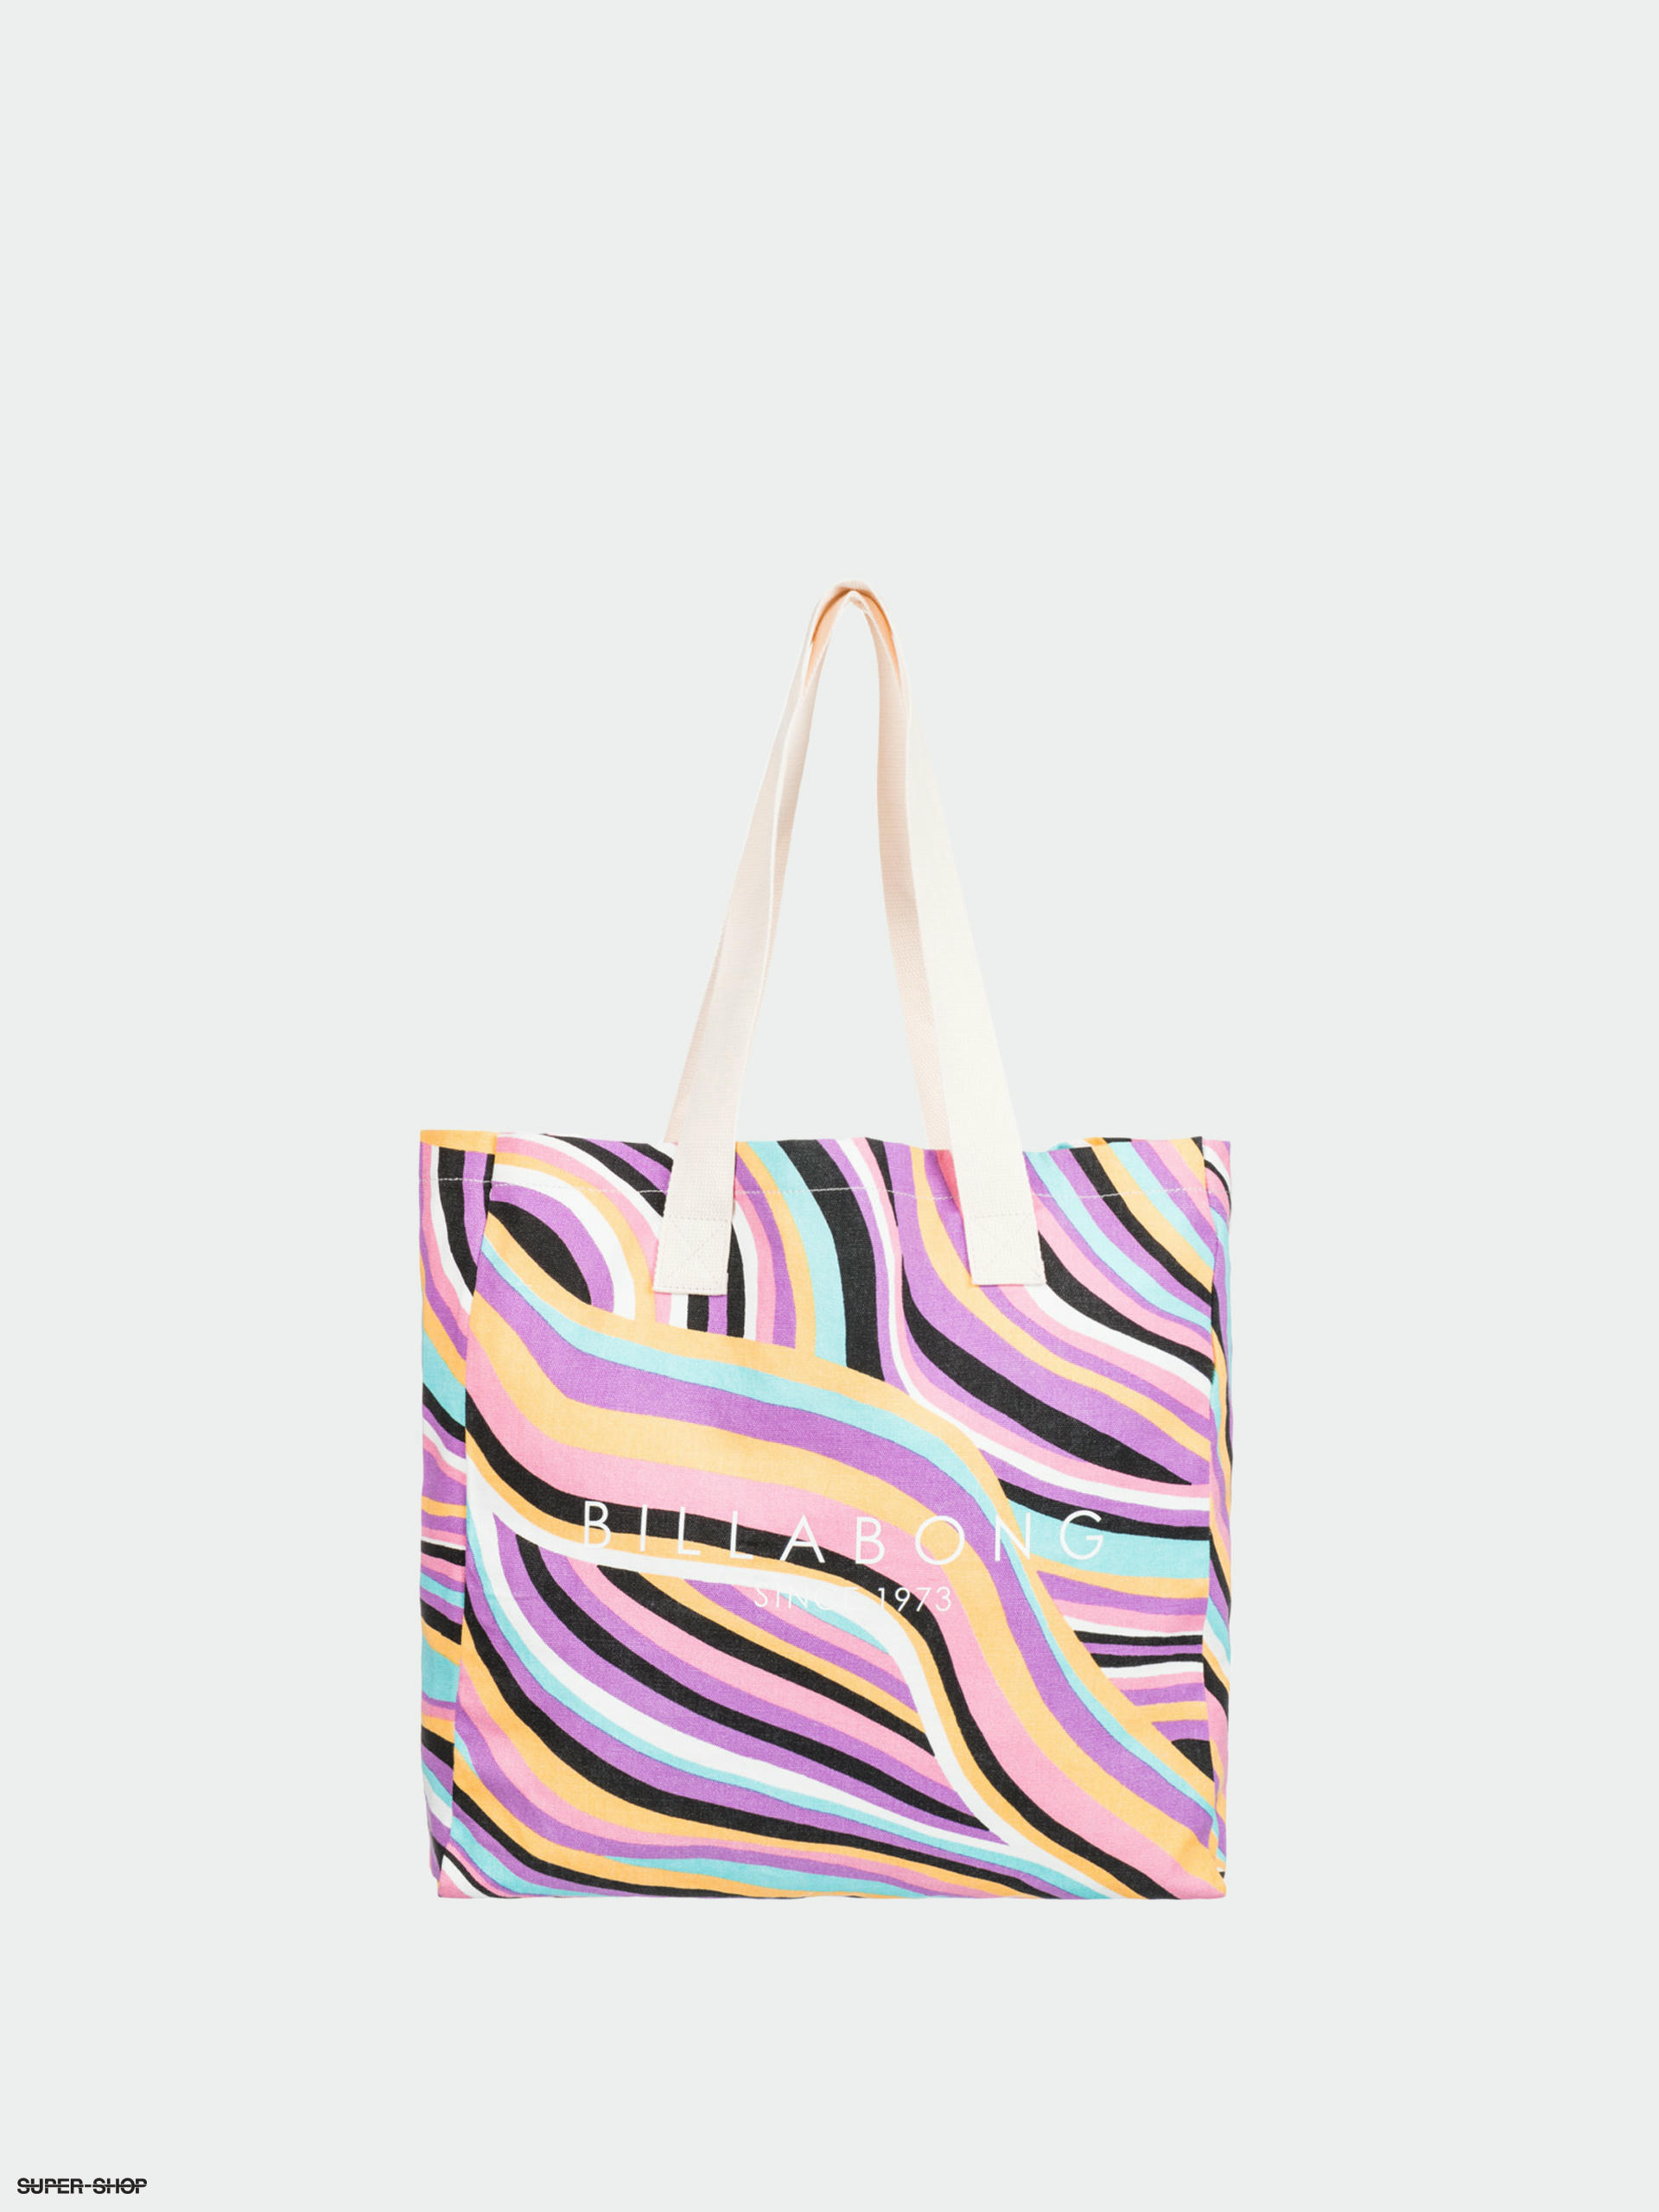 Paperchase Striped Colorful Tote Bag Purse School Bag… - Gem